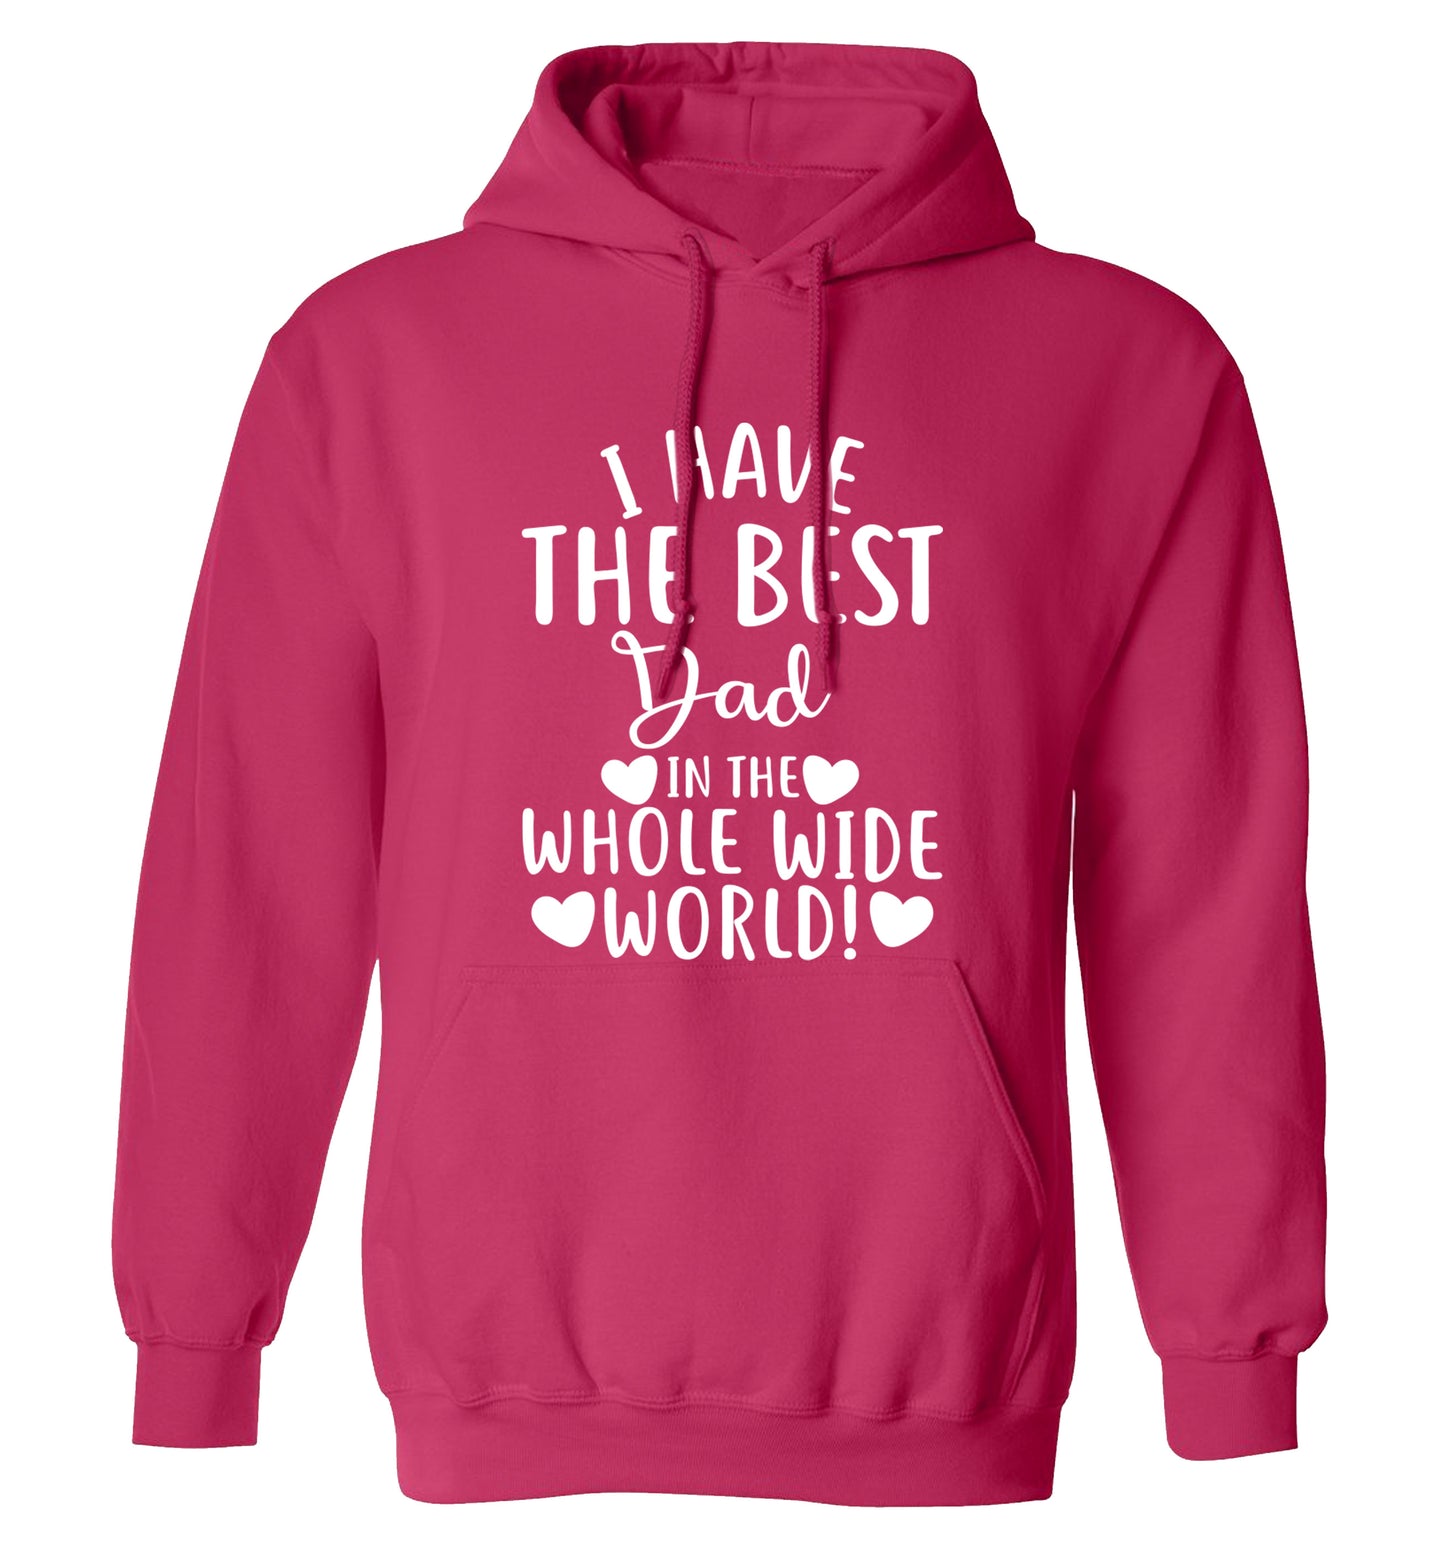 I have the best dad in the whole wide world! adults unisex pink hoodie 2XL